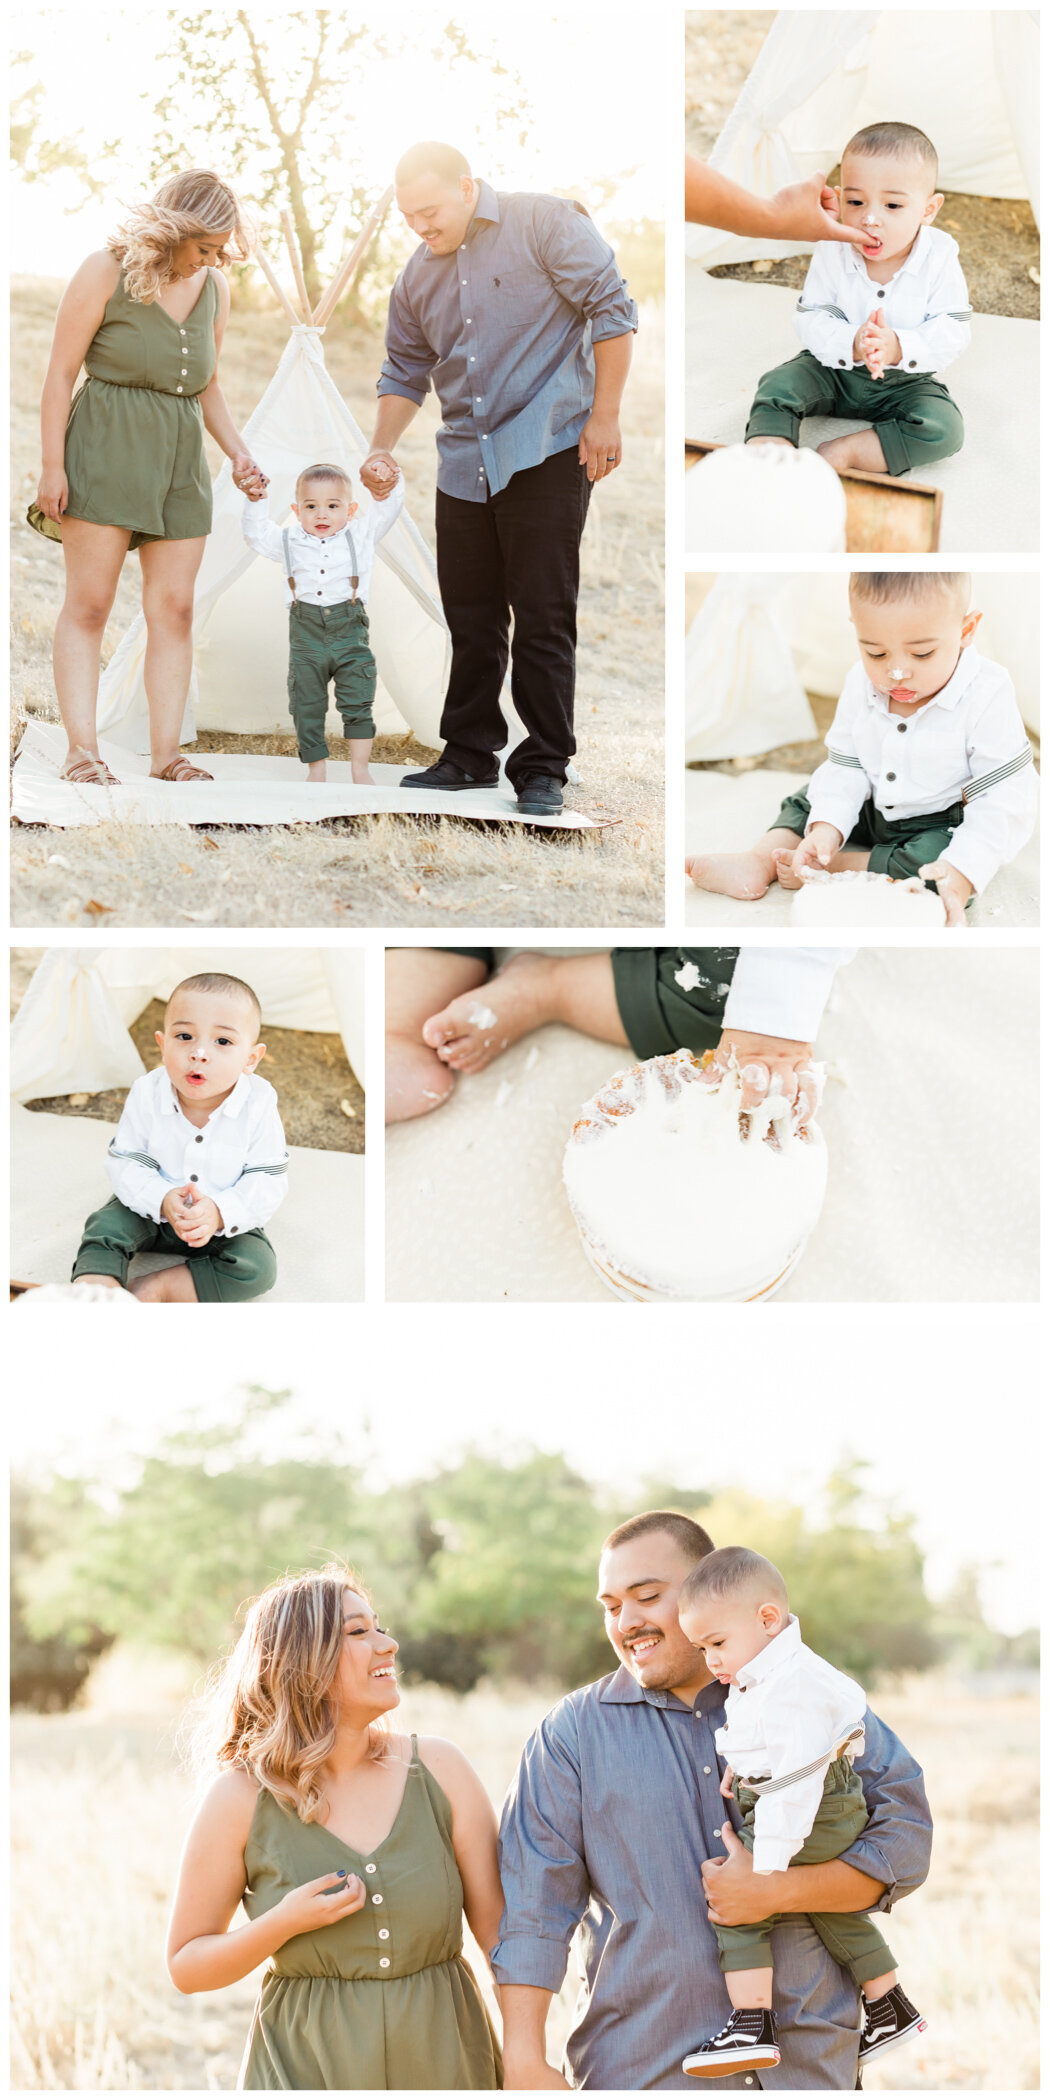 Collage of photos from one year old boy cake smash photo session.